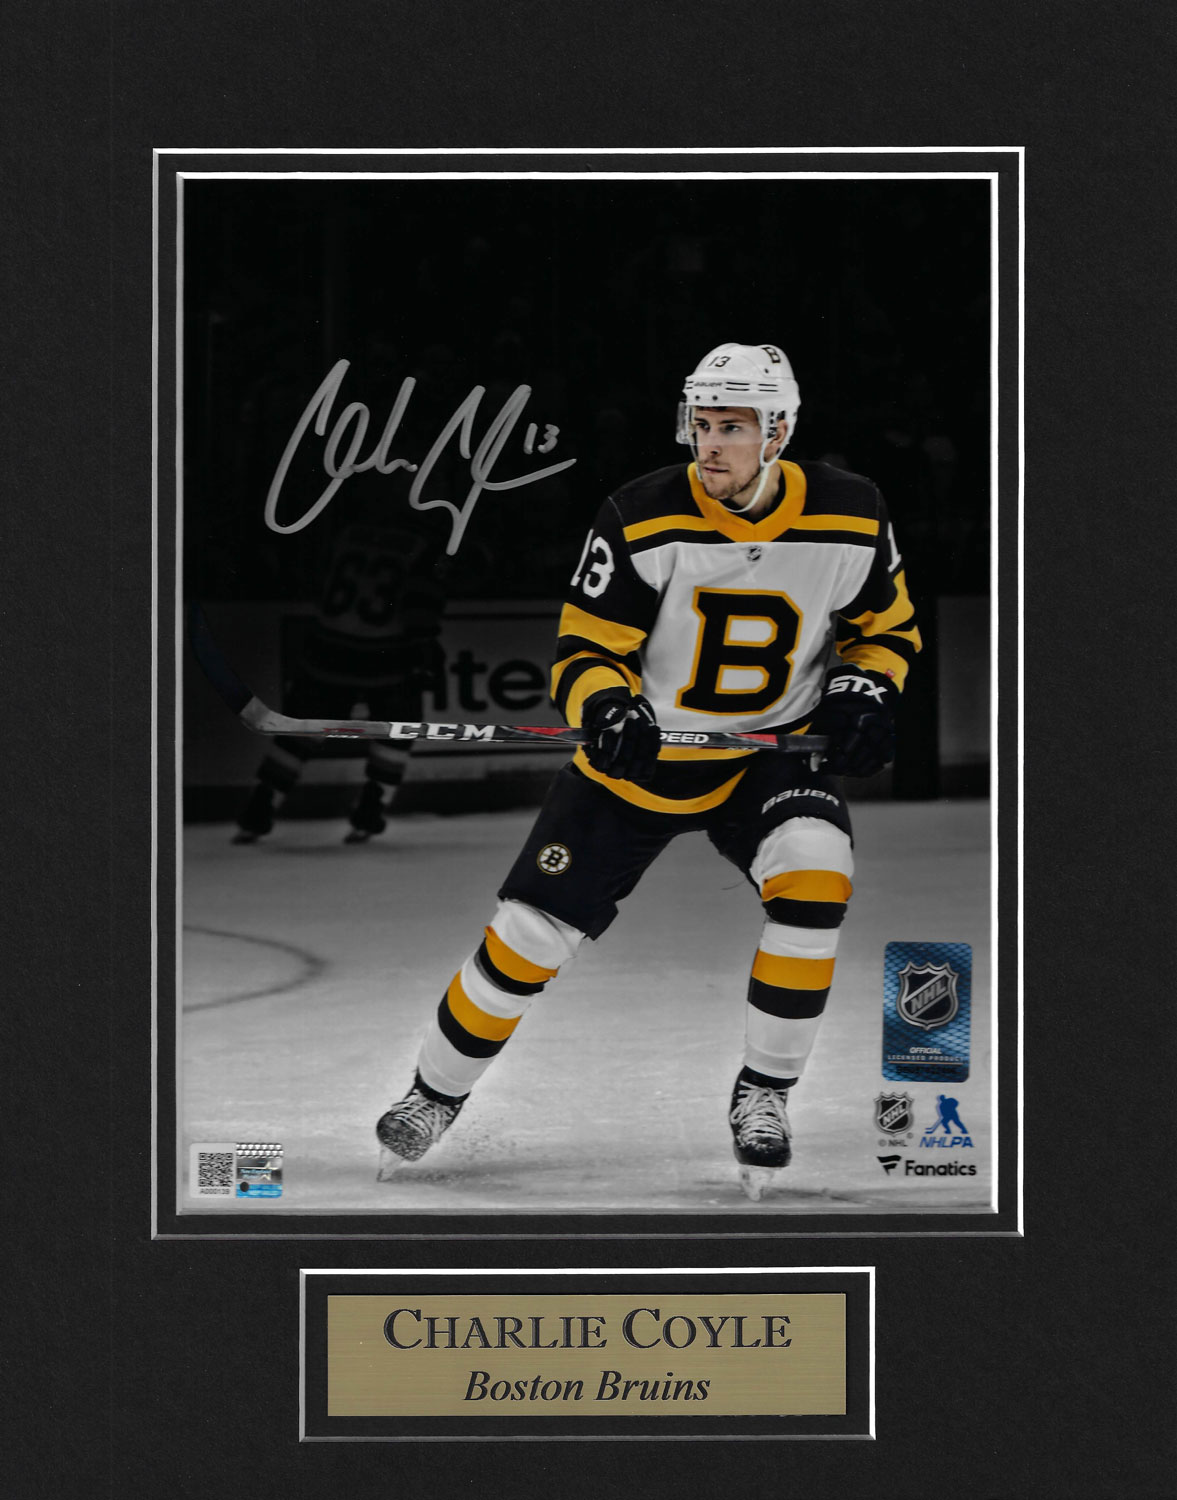 Bobby Orr Signed Boston Bruins 11x14 Photo in 16x20 Matted Display